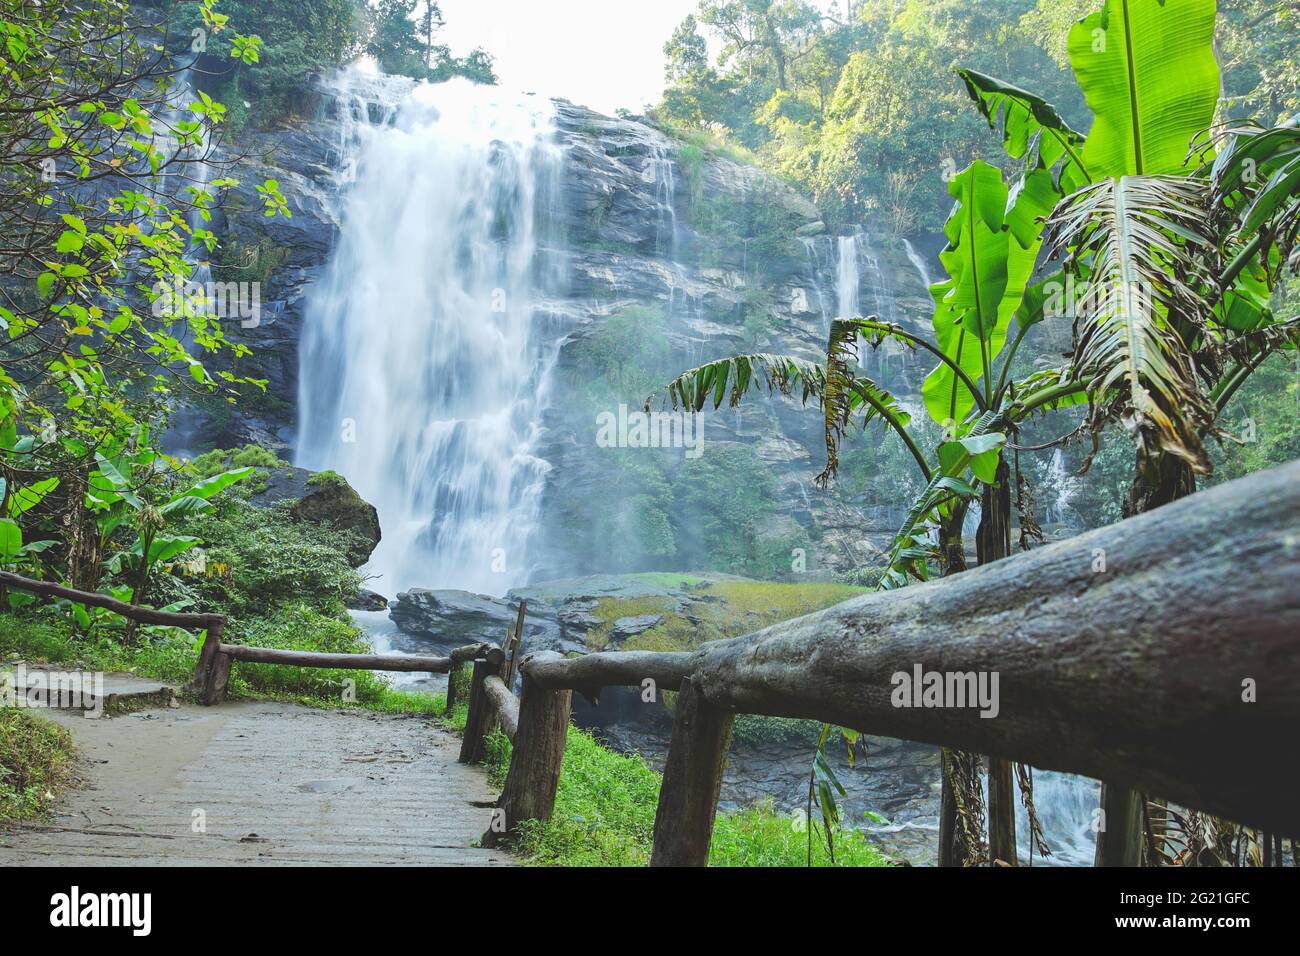 Wachirathan Waterfall at Doi Inthanon National Park in Mae Chaem district, Chiang Mai province, Thailand. Stock Photo